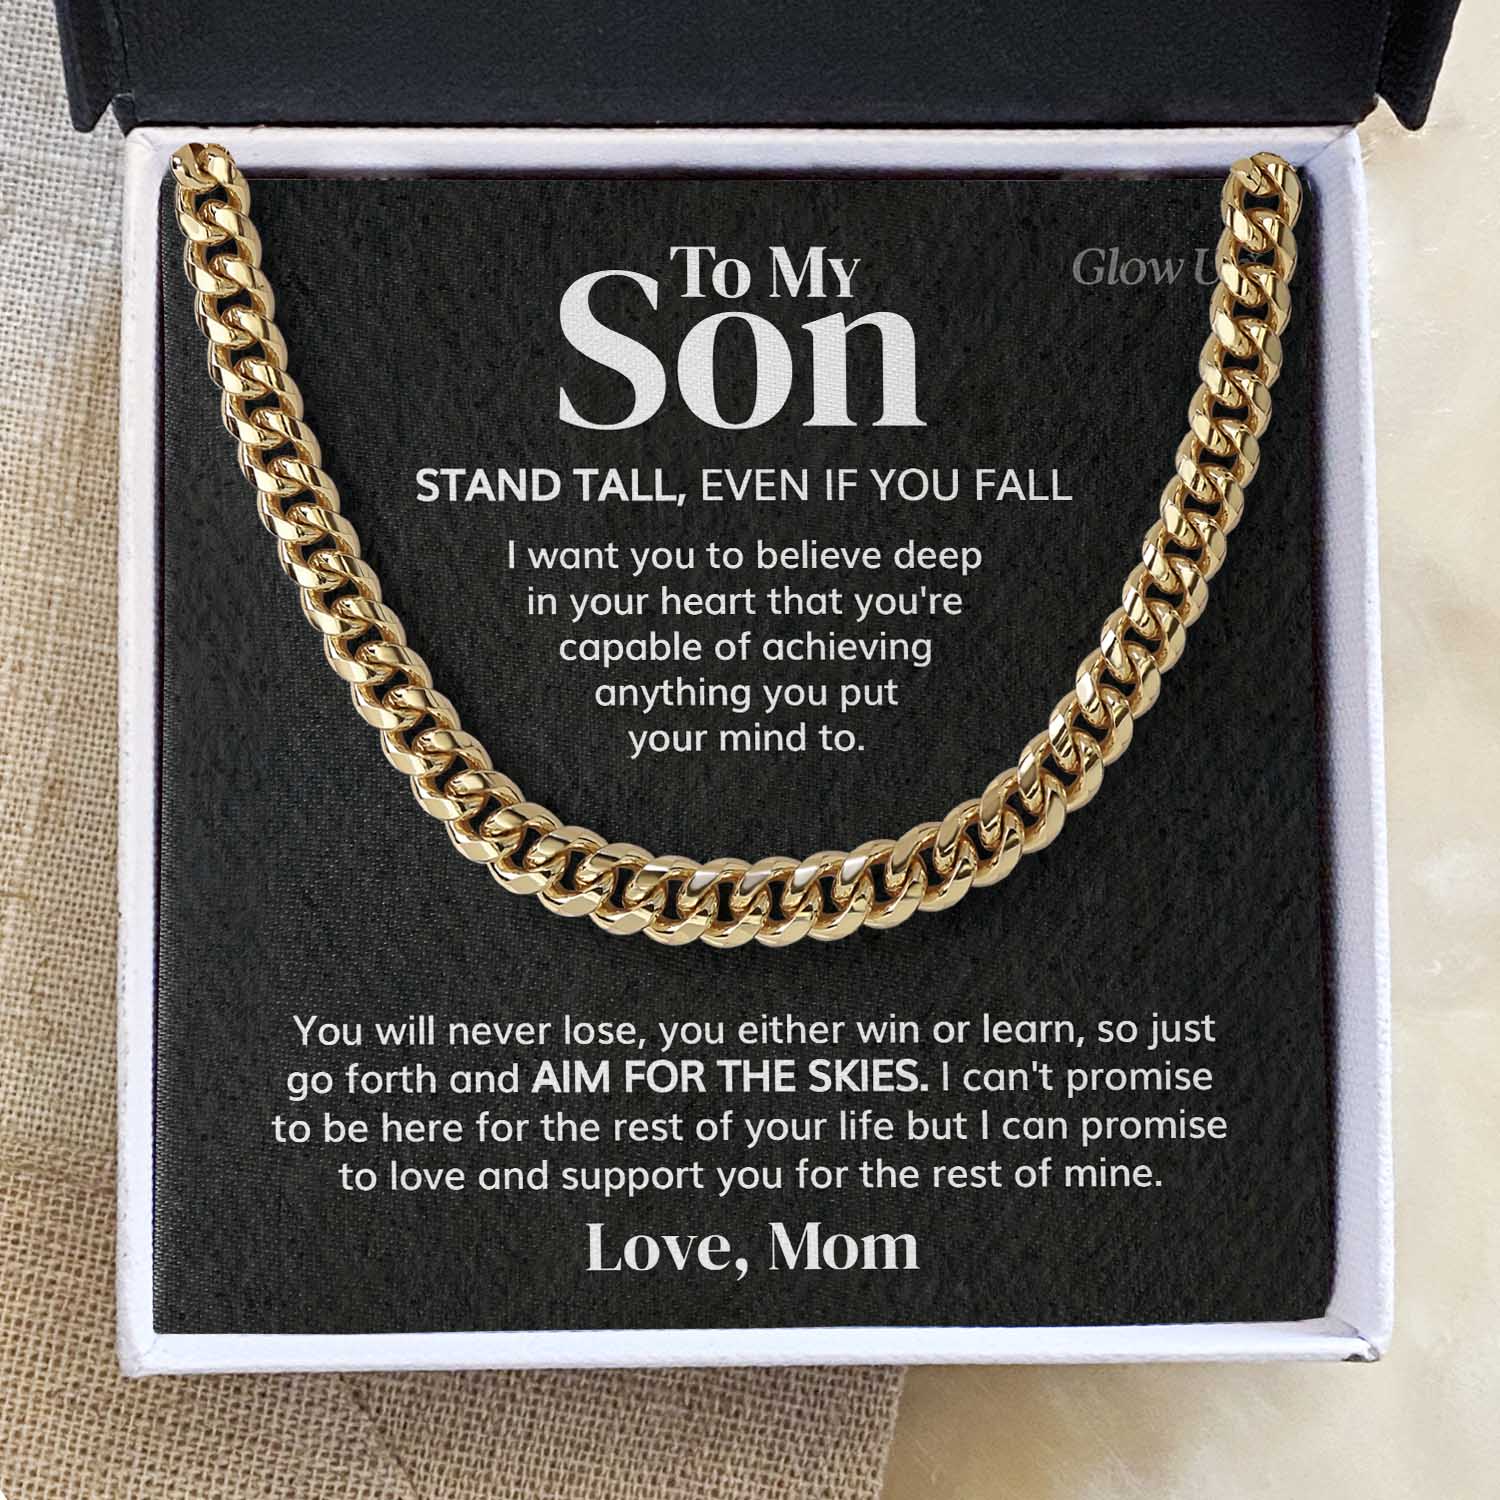 ShineOn Fulfillment Jewelry 14K Yellow Gold Finish / Two-Toned Box To my Son - Aim for the skies - Cuban Link Chain Necklace